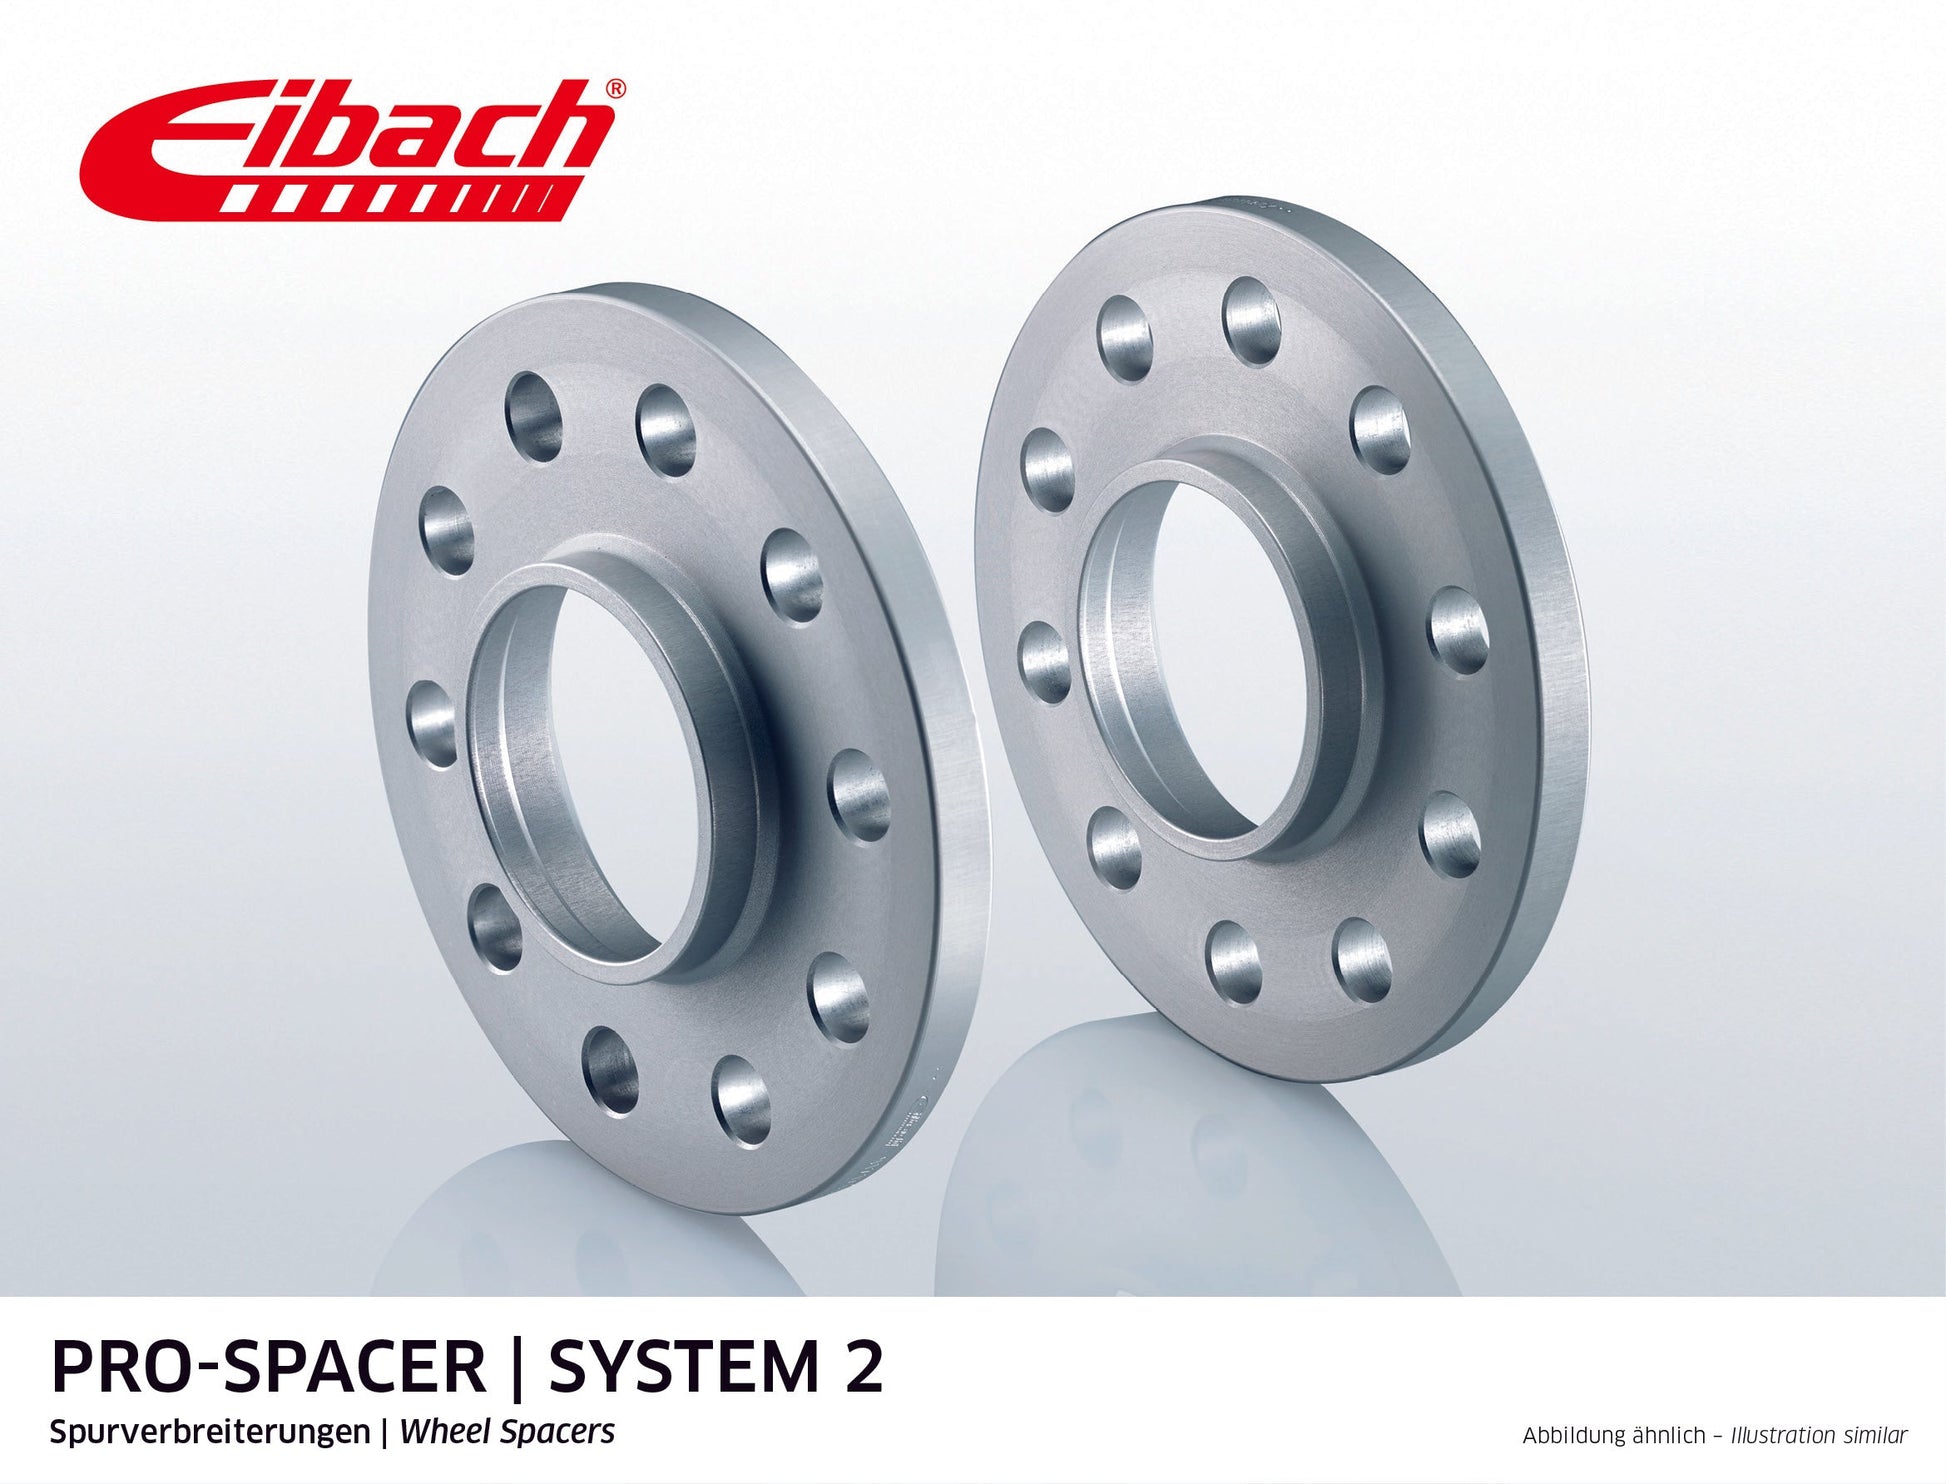 Eibach Pro-Spacer Kit (Pair Of Spacers) 20mm Per Spacer (System 2) S90-2-20-020 (Silver) at £127.67